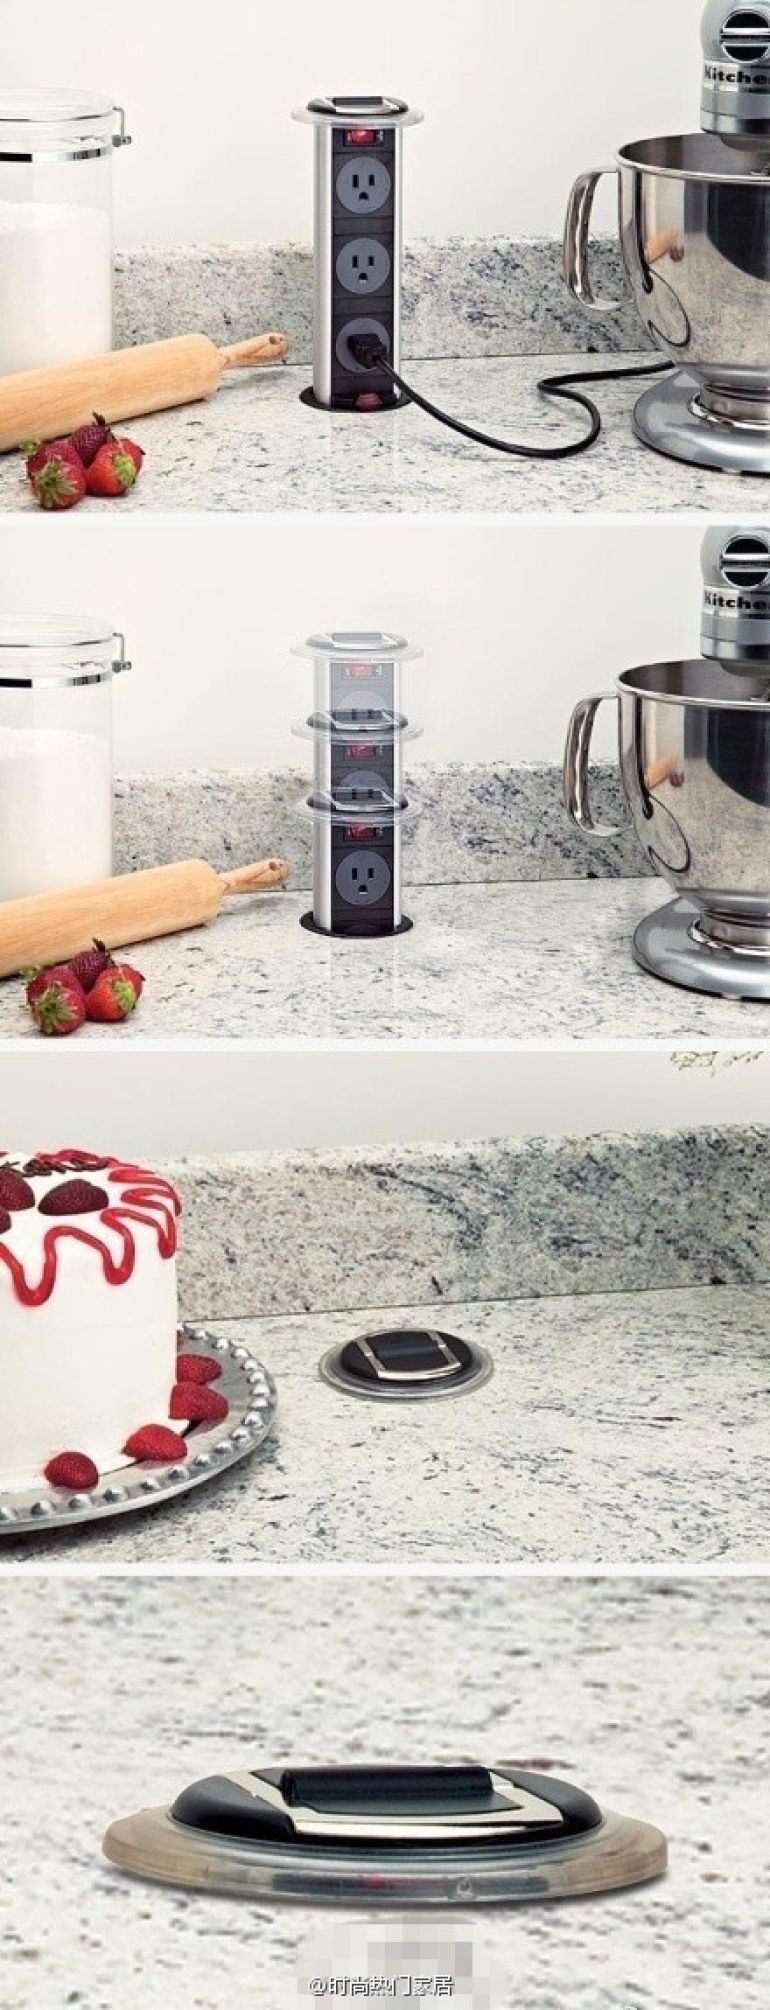 Pop Up Outlet Kitchen Countertop ?width=843&name=pop Up Outlet Kitchen Countertop 